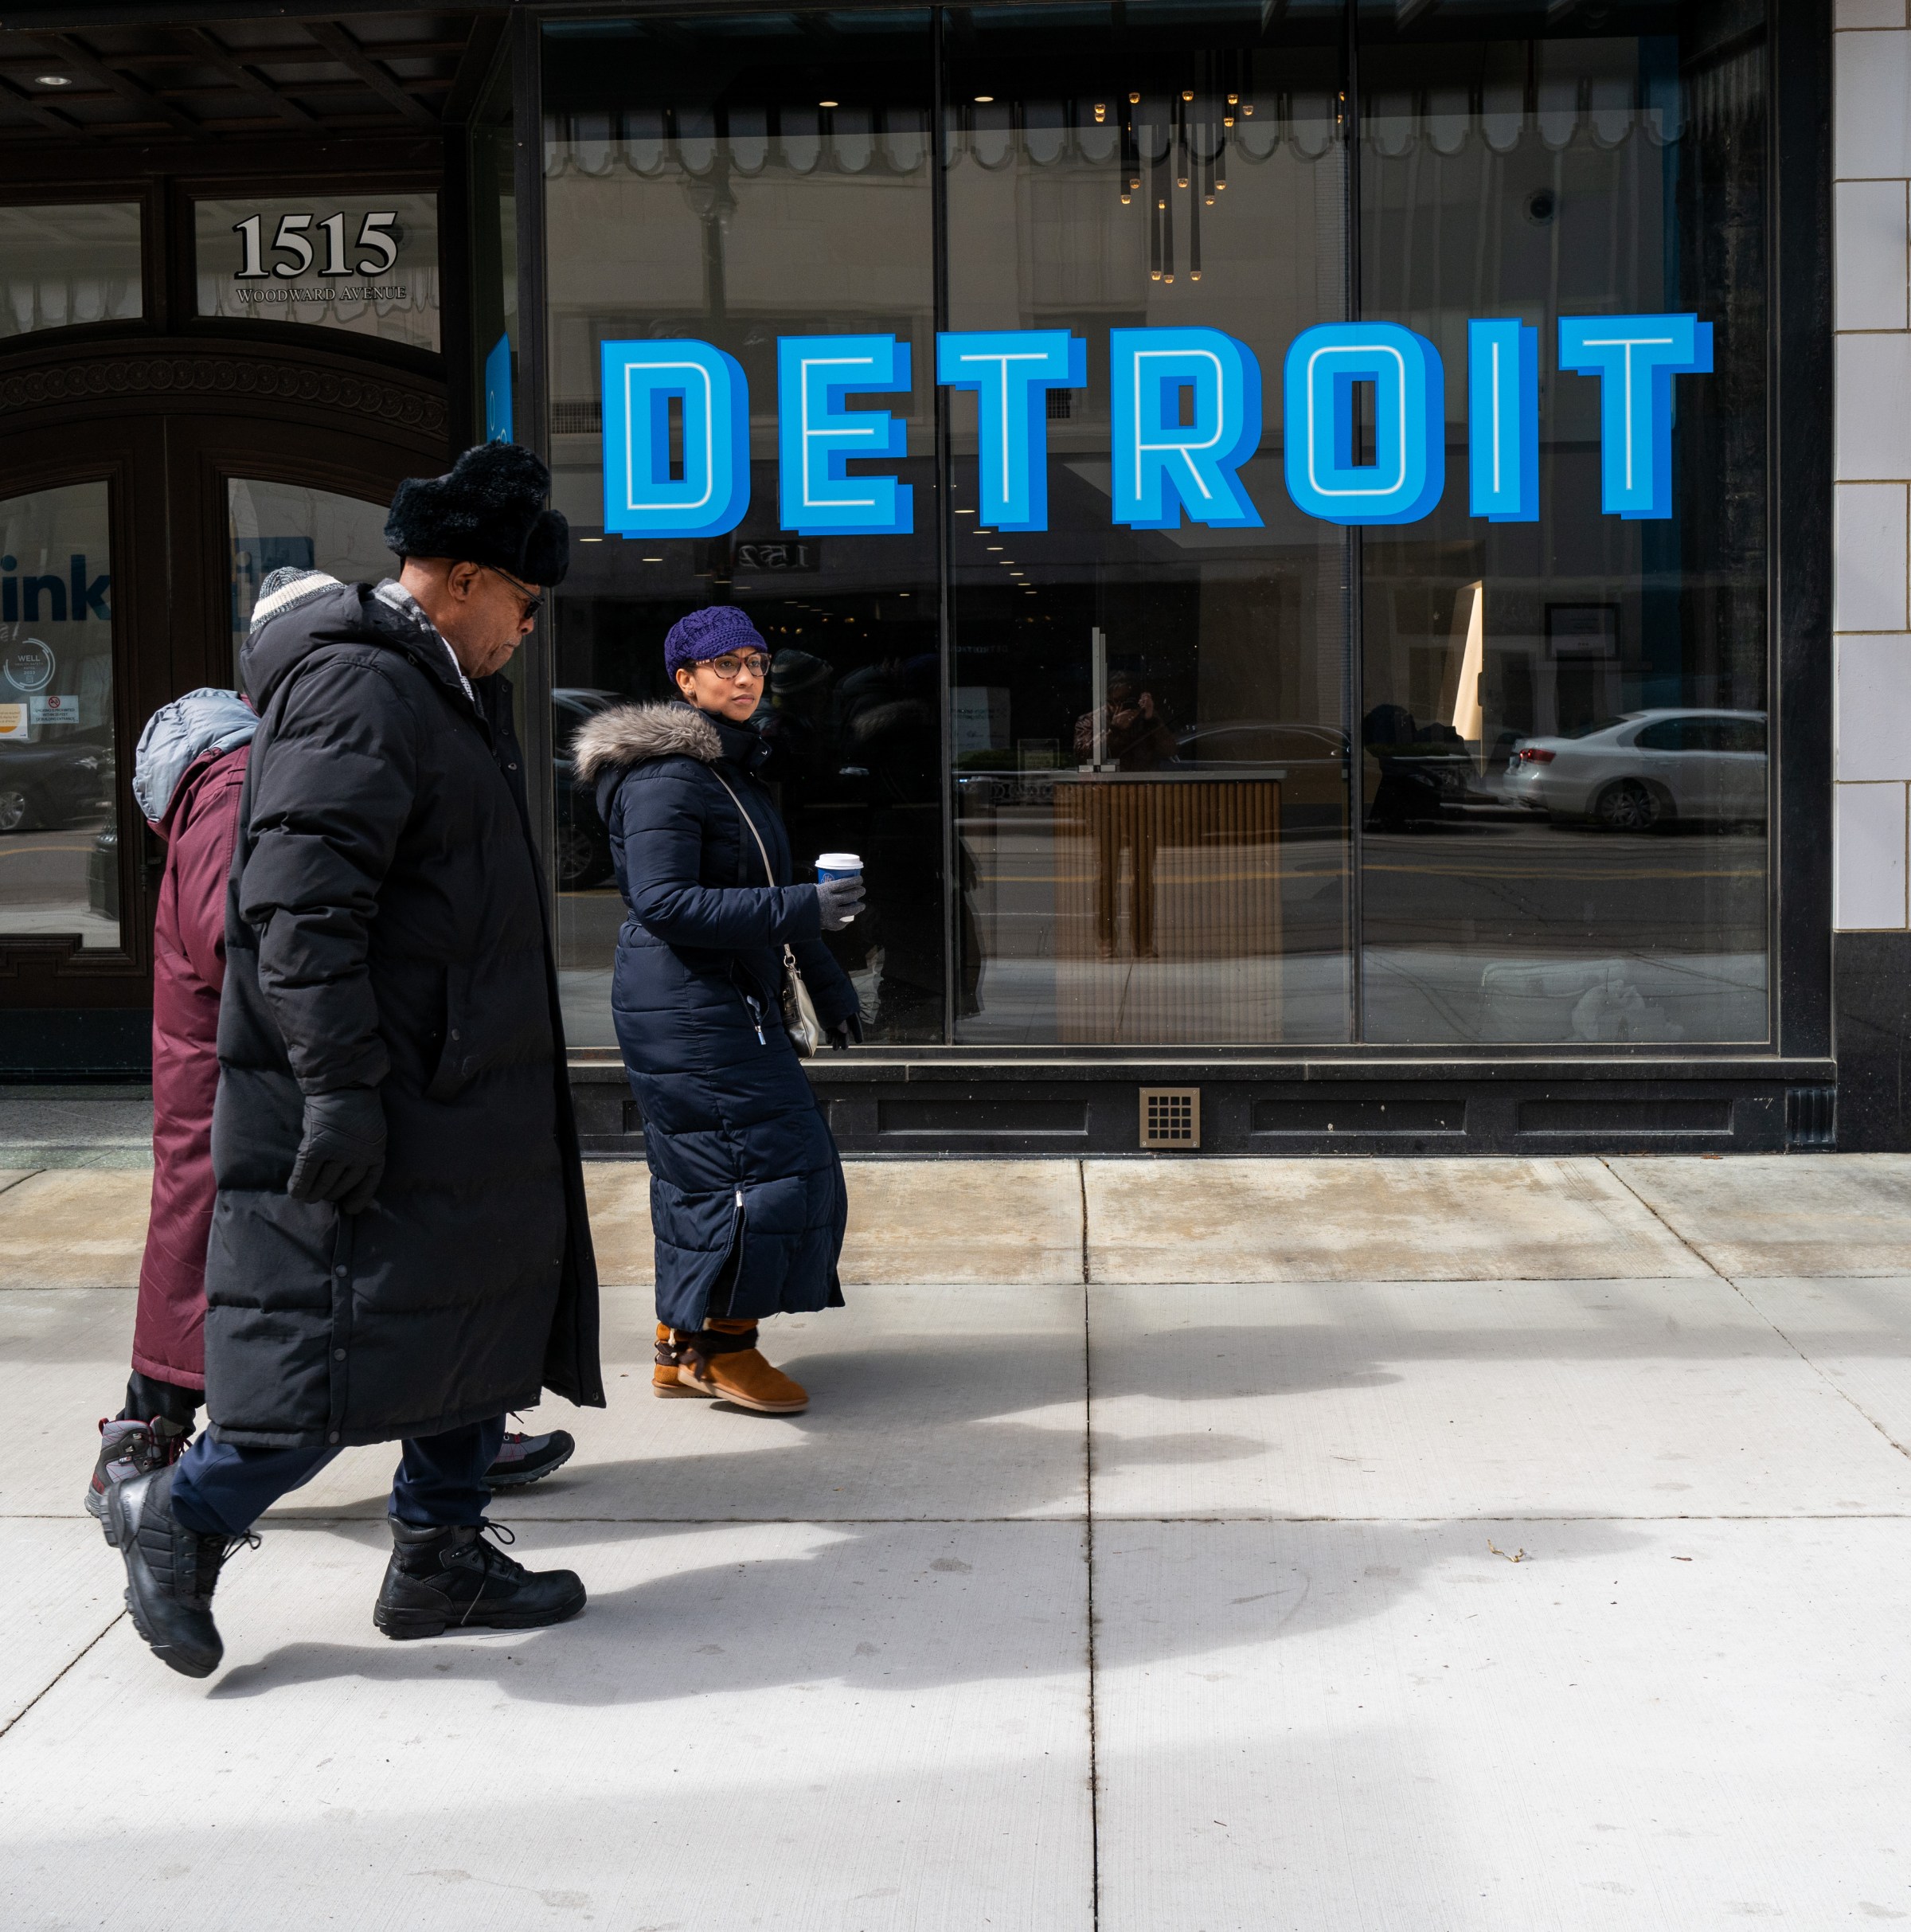 Want to know how to reduce gun crime? Look at Detroit.